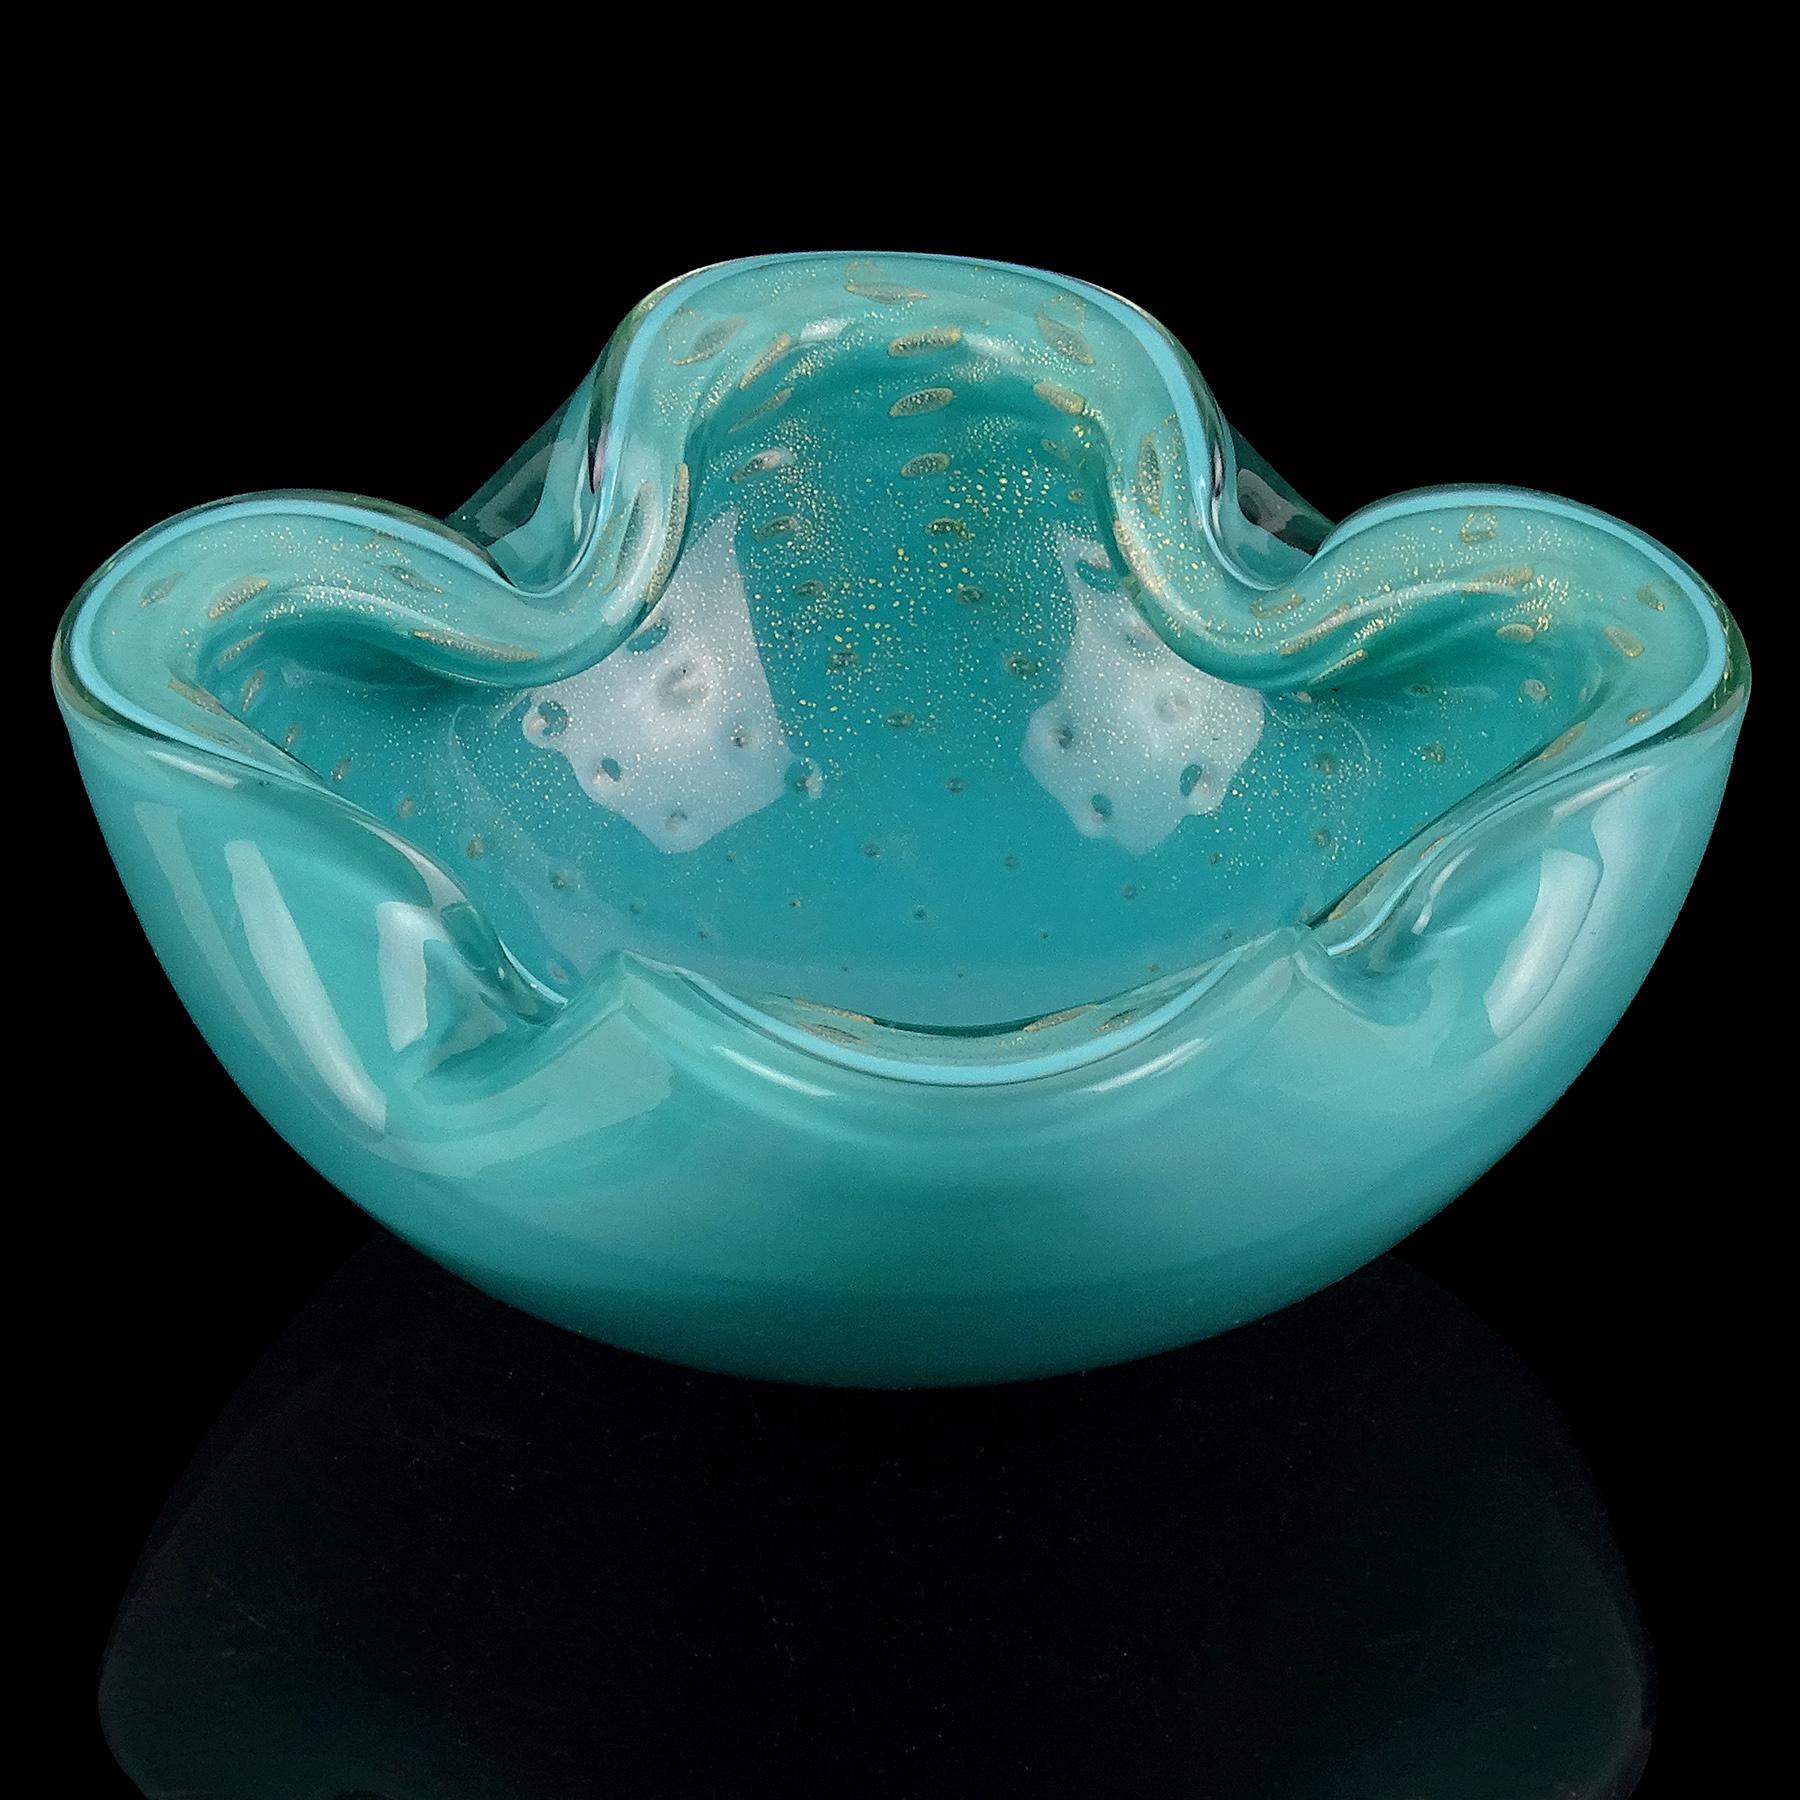 Beautiful vintage Murano hand blown teal blue/green and gold flecks Italian art glass bowl. Documented to designer Alfredo Barbini, circa 1950s. The bowl has four indents on the rim, with 